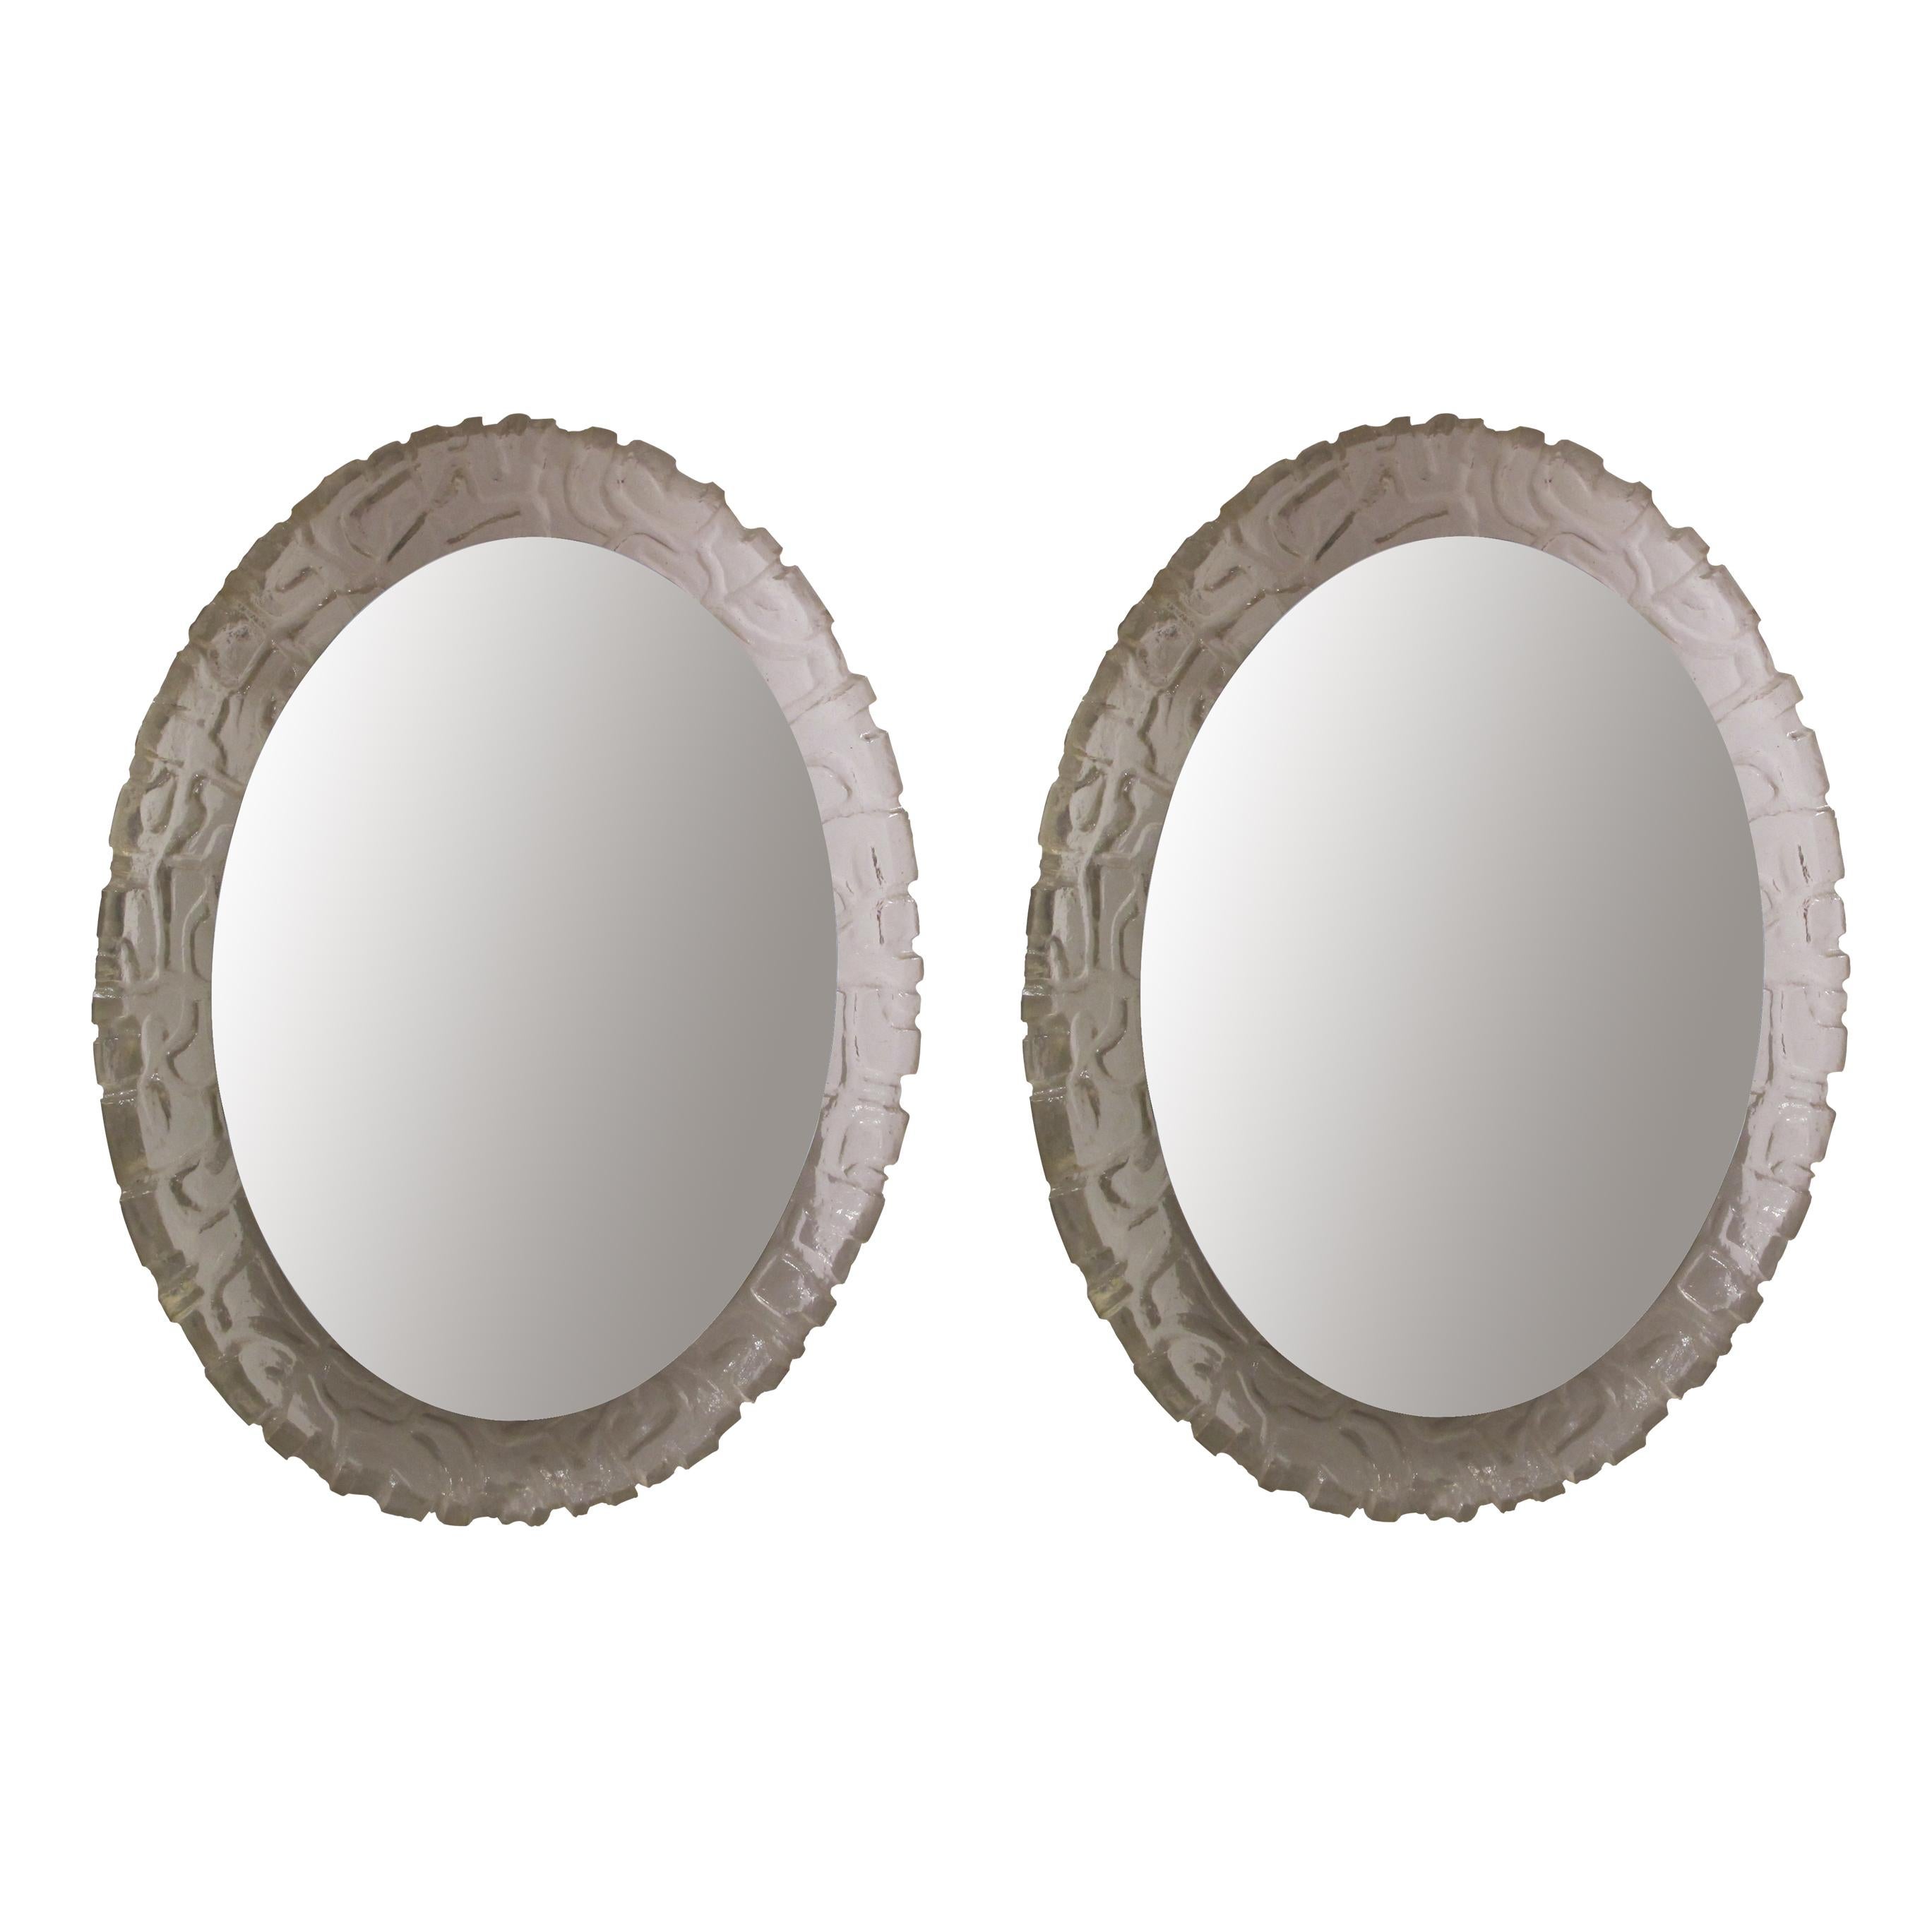 Pair of oval backlit wall mirrors with a moulded Lucite frame. Manufactured by Balschbach in Germany in the 1960s. The light reflects through the textured Lucite frame which gives a warm, ambient, glowing light evenly throughout the whole frame. The